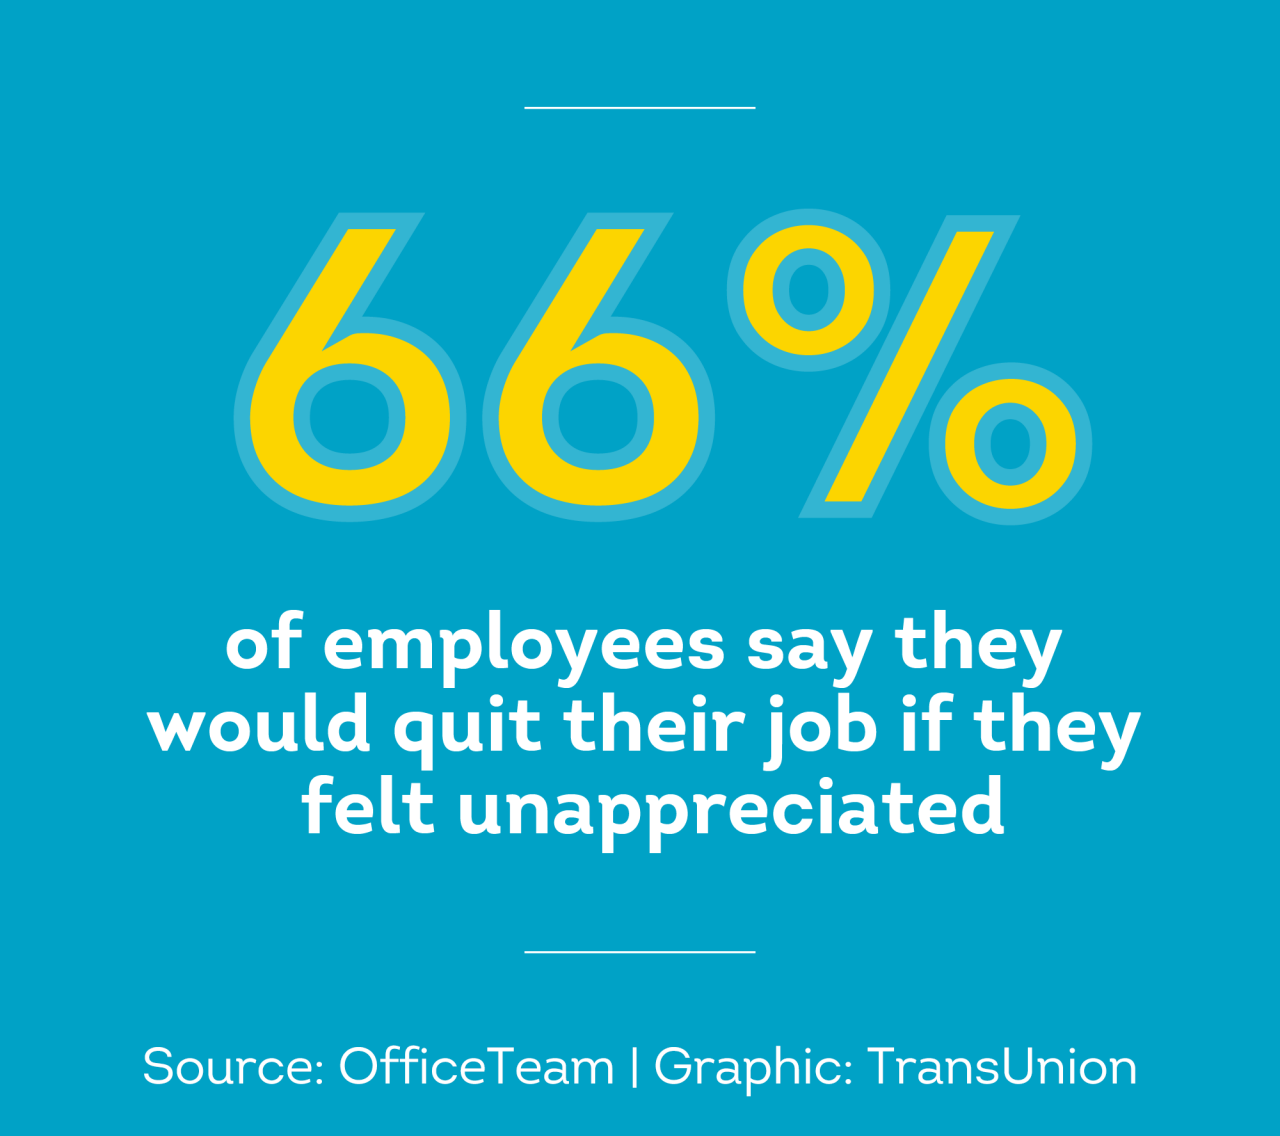 66% of employees say they’d leave their job is they didn’t feel appreciated